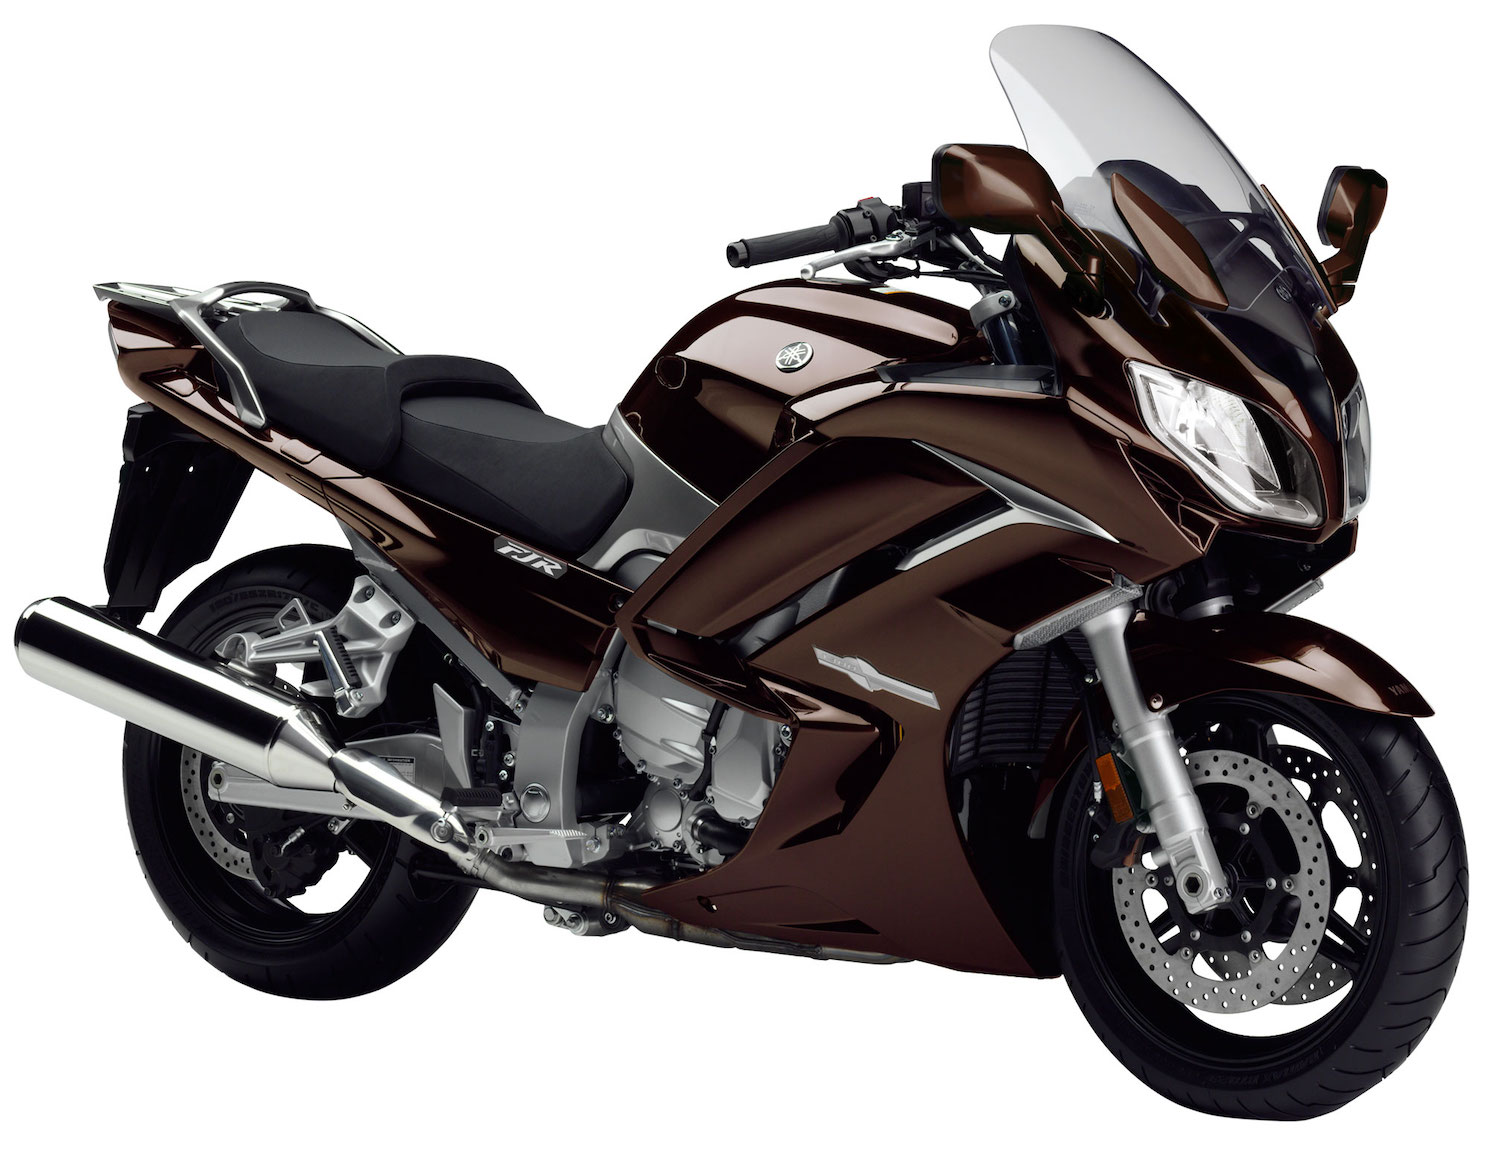 This is a promo photo of a a  2014 Yamaha FJR, like the one used to break the Cannonball motorcycle record | Yamaha Motor Company